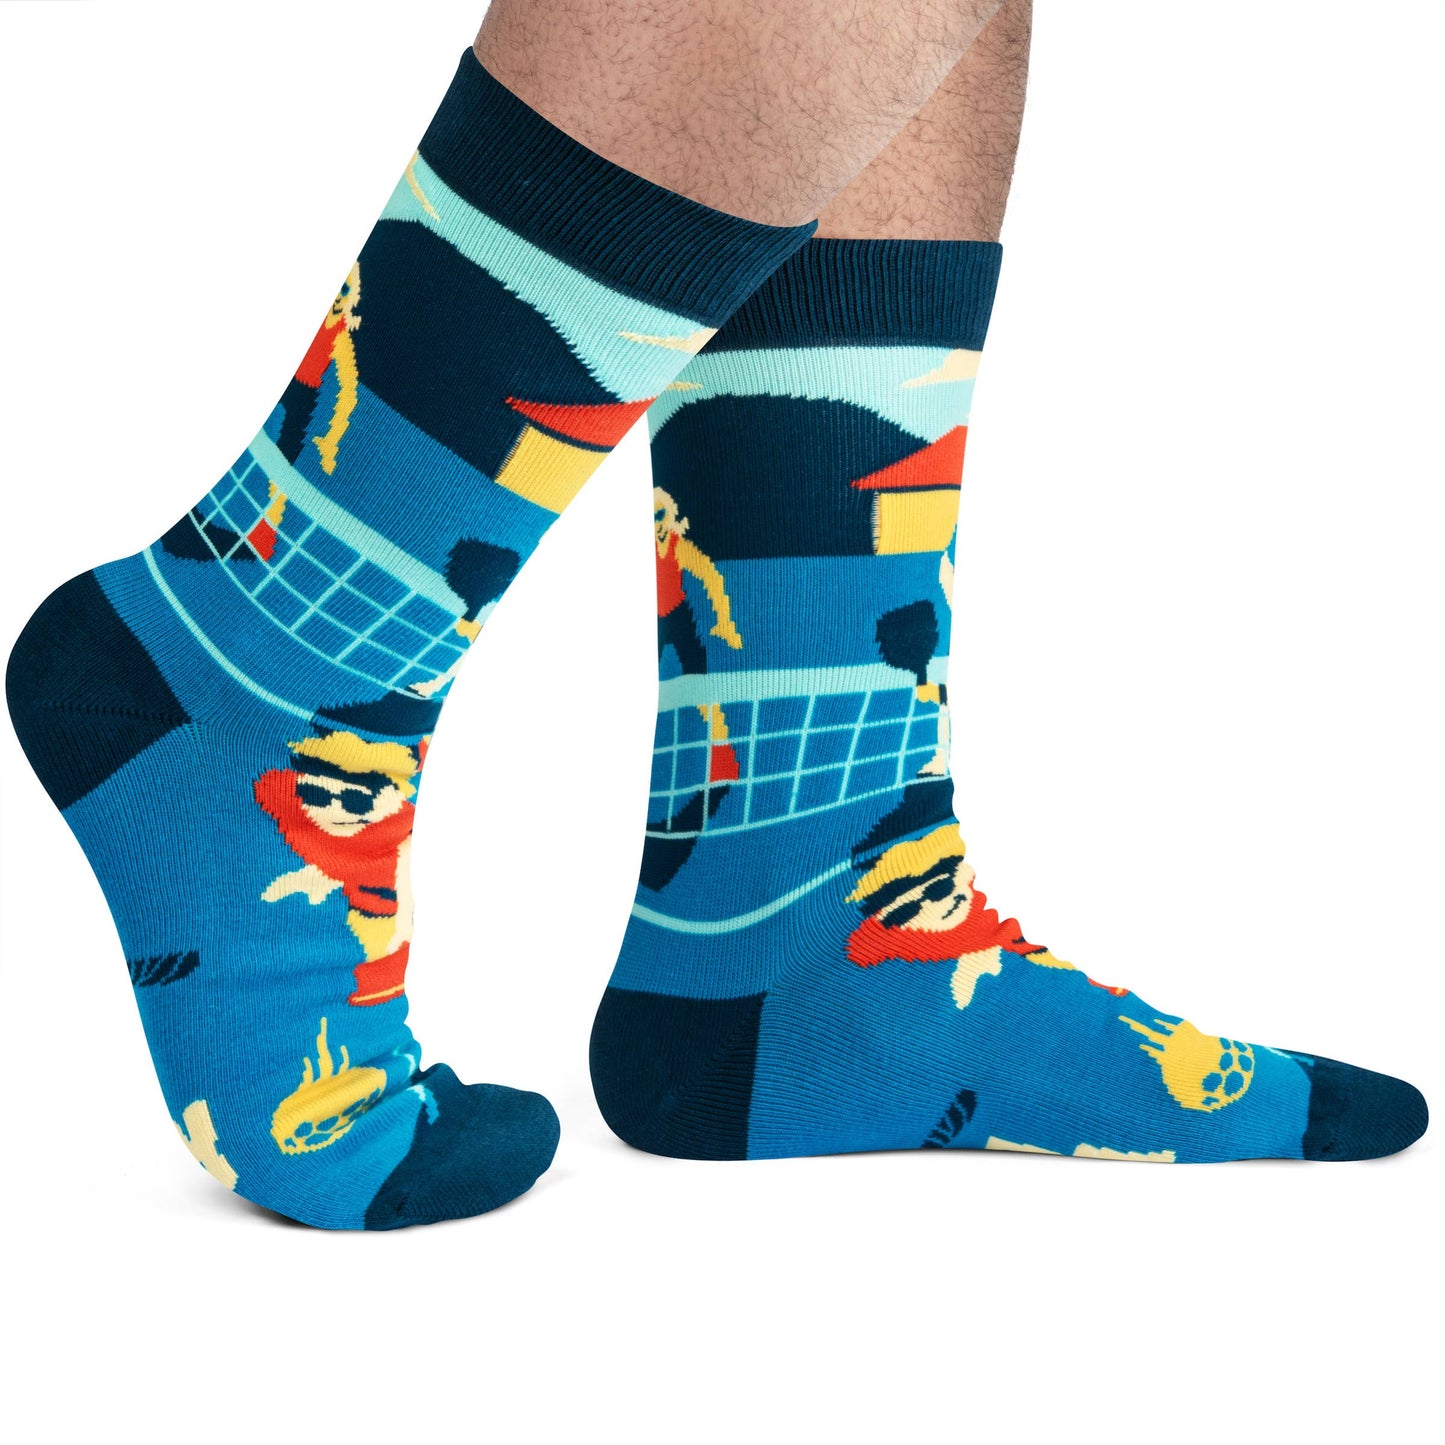 Lavley - I'd Rather Be Playing Pickleball Socks